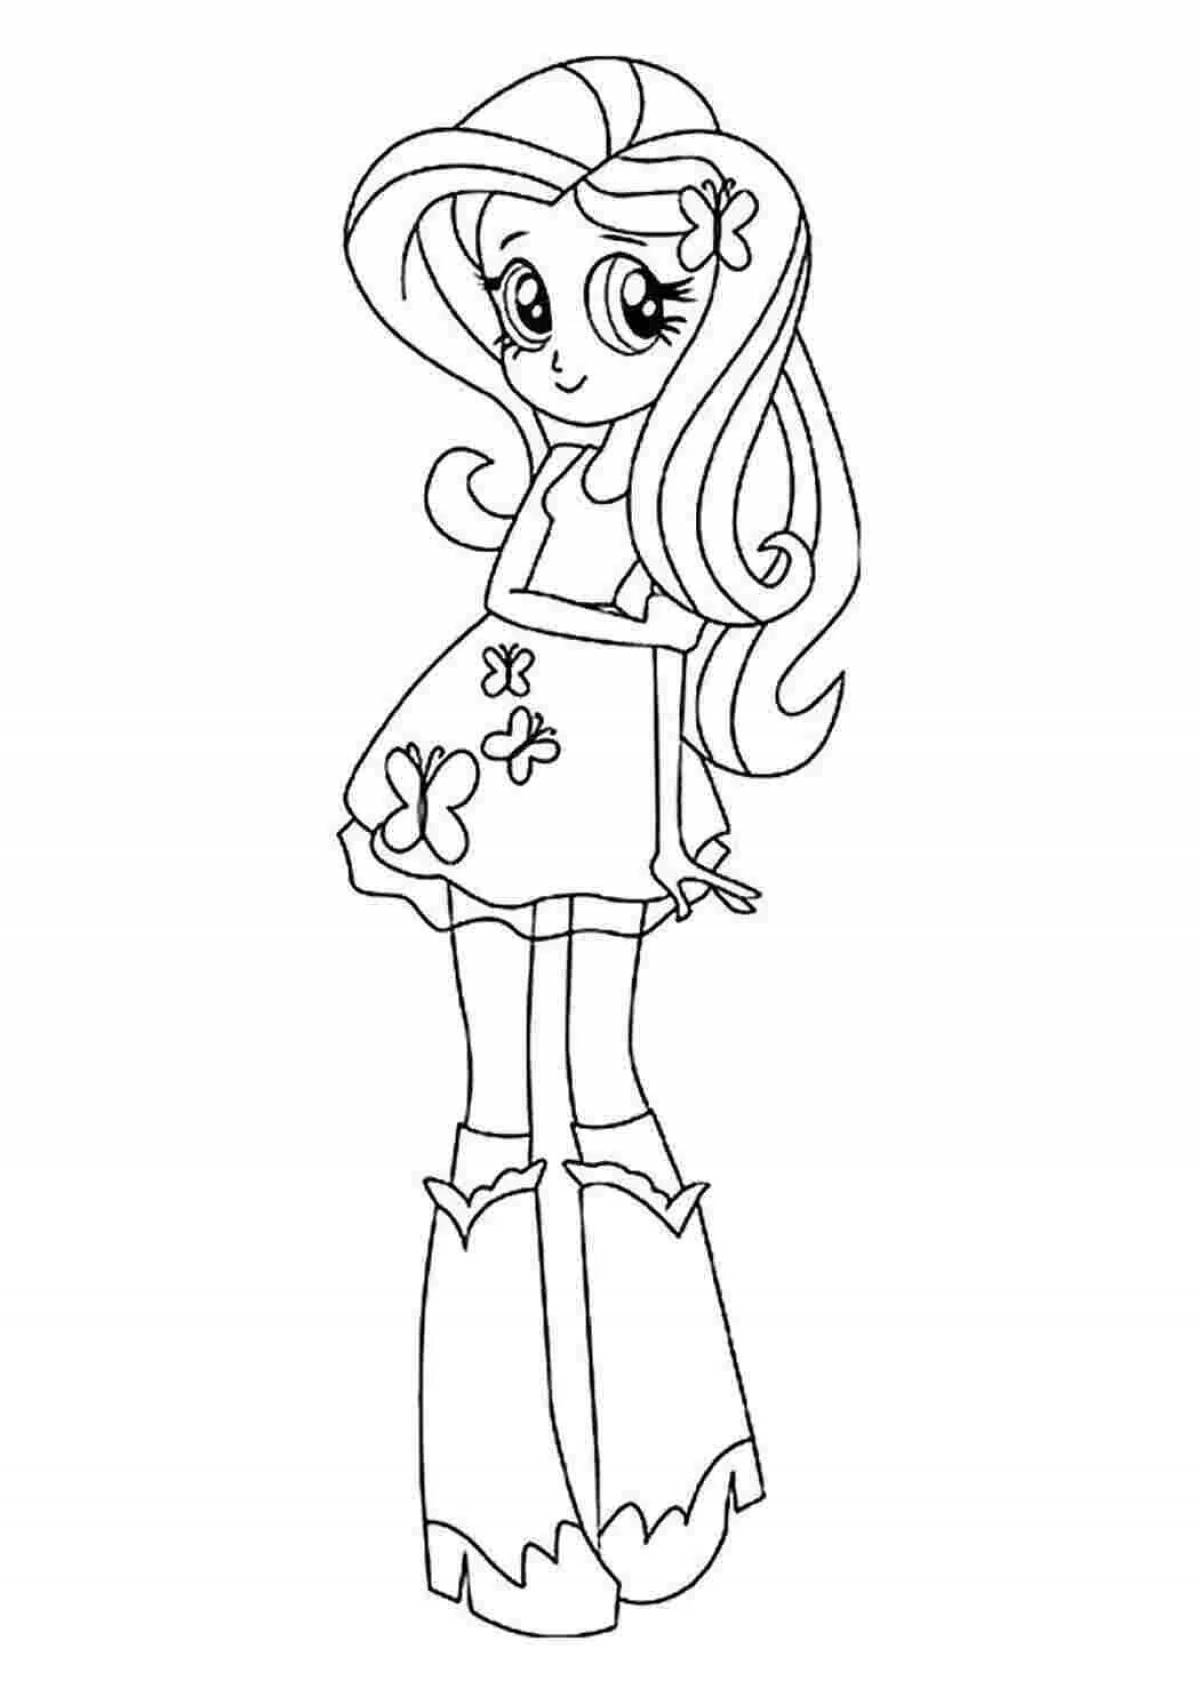 Exciting equestria girl coloring pages